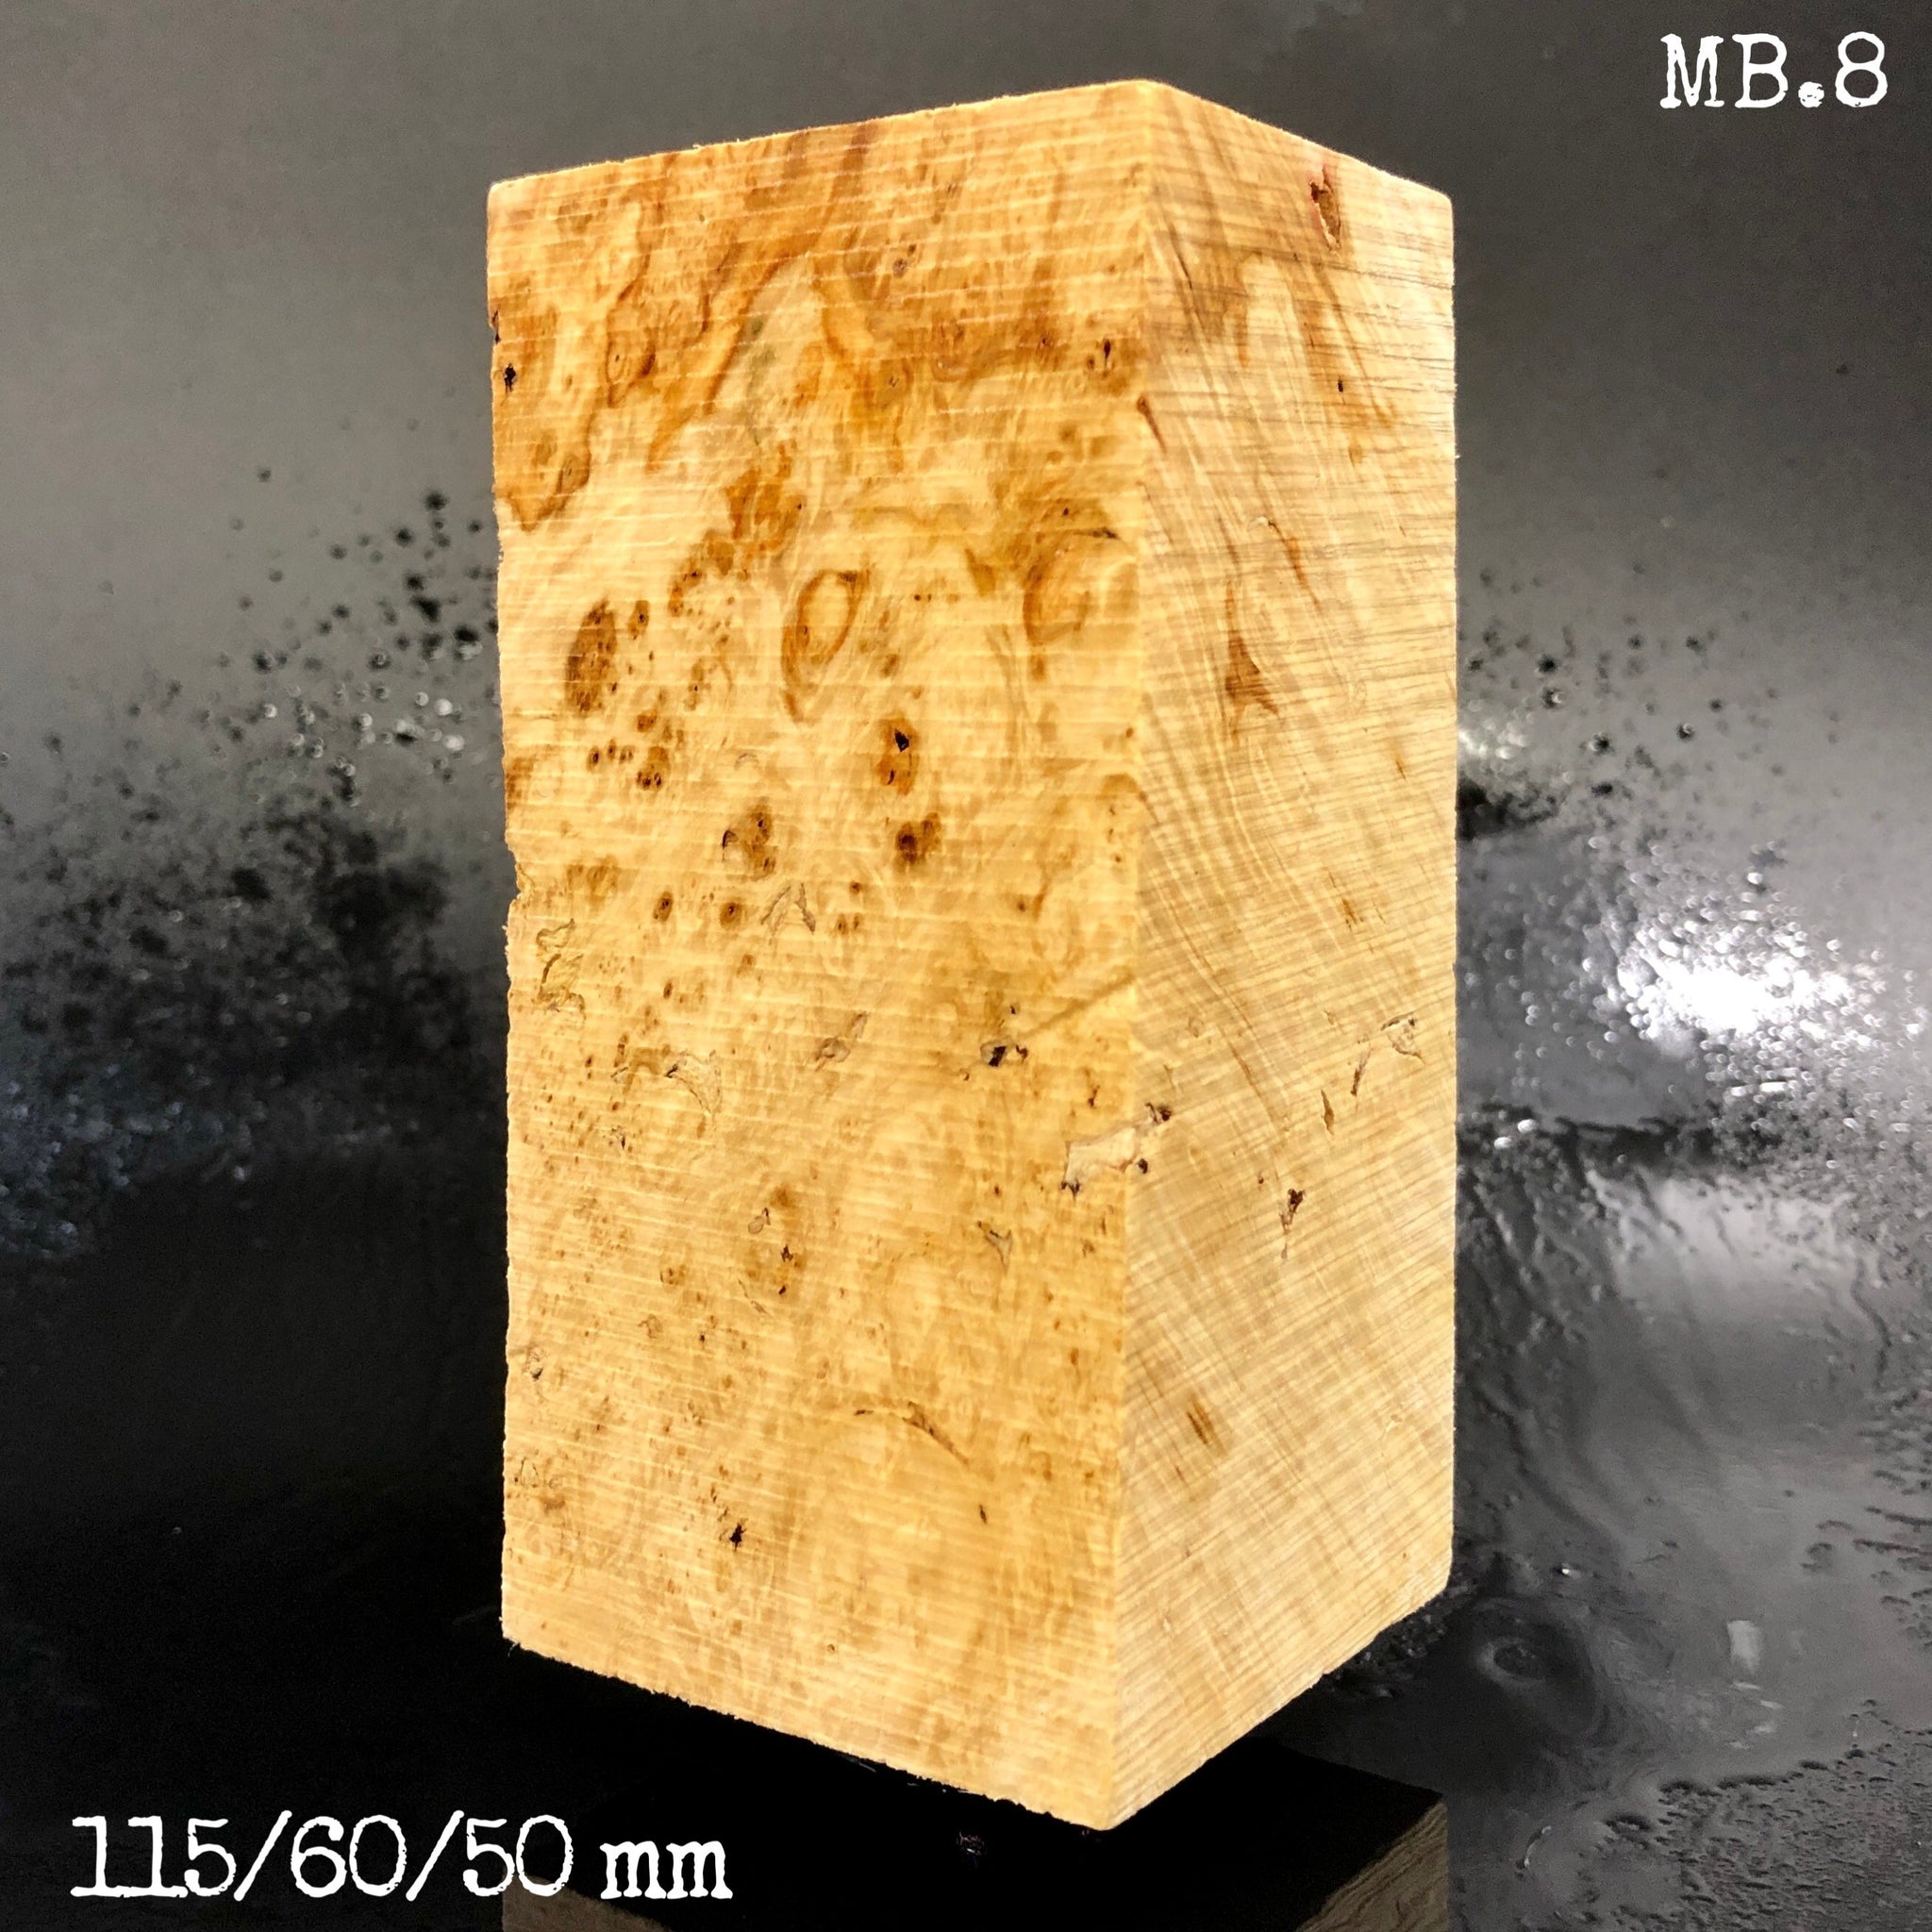 Buy Maple Burl, Wood Blank for Crafting, Woodworking, Turning, DIY.